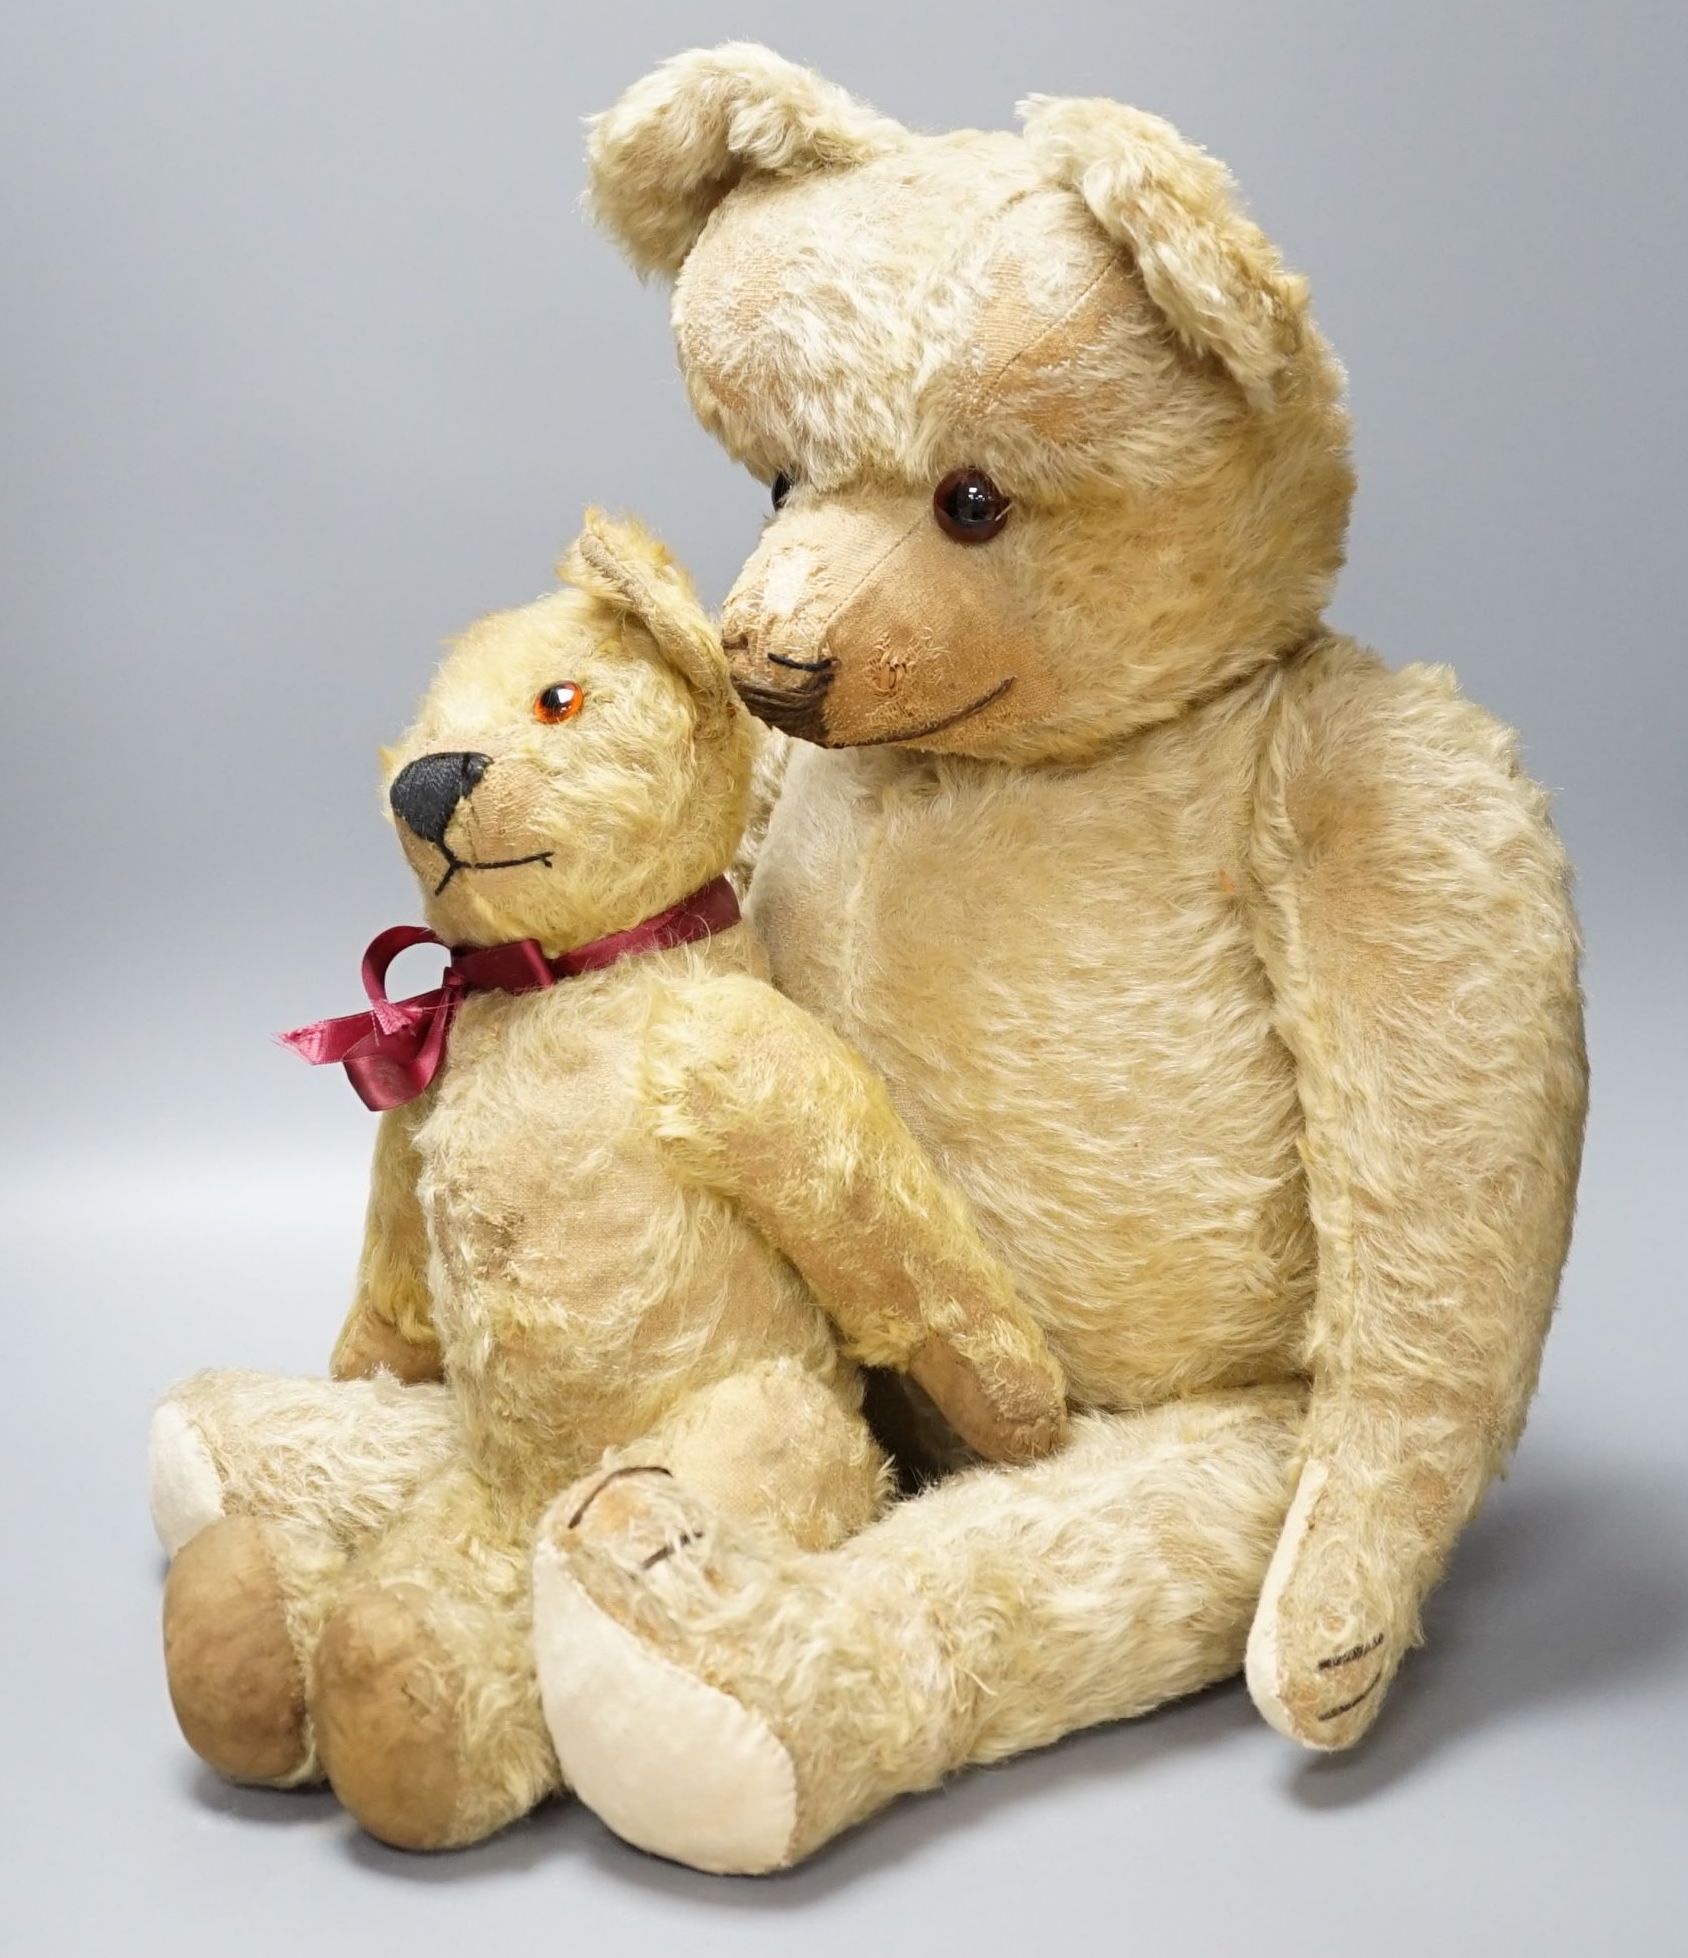 A large 1920's Chad Valley Teddy bear, 75cm, together with another 1920's Chad Valley Teddy bear, play-worn